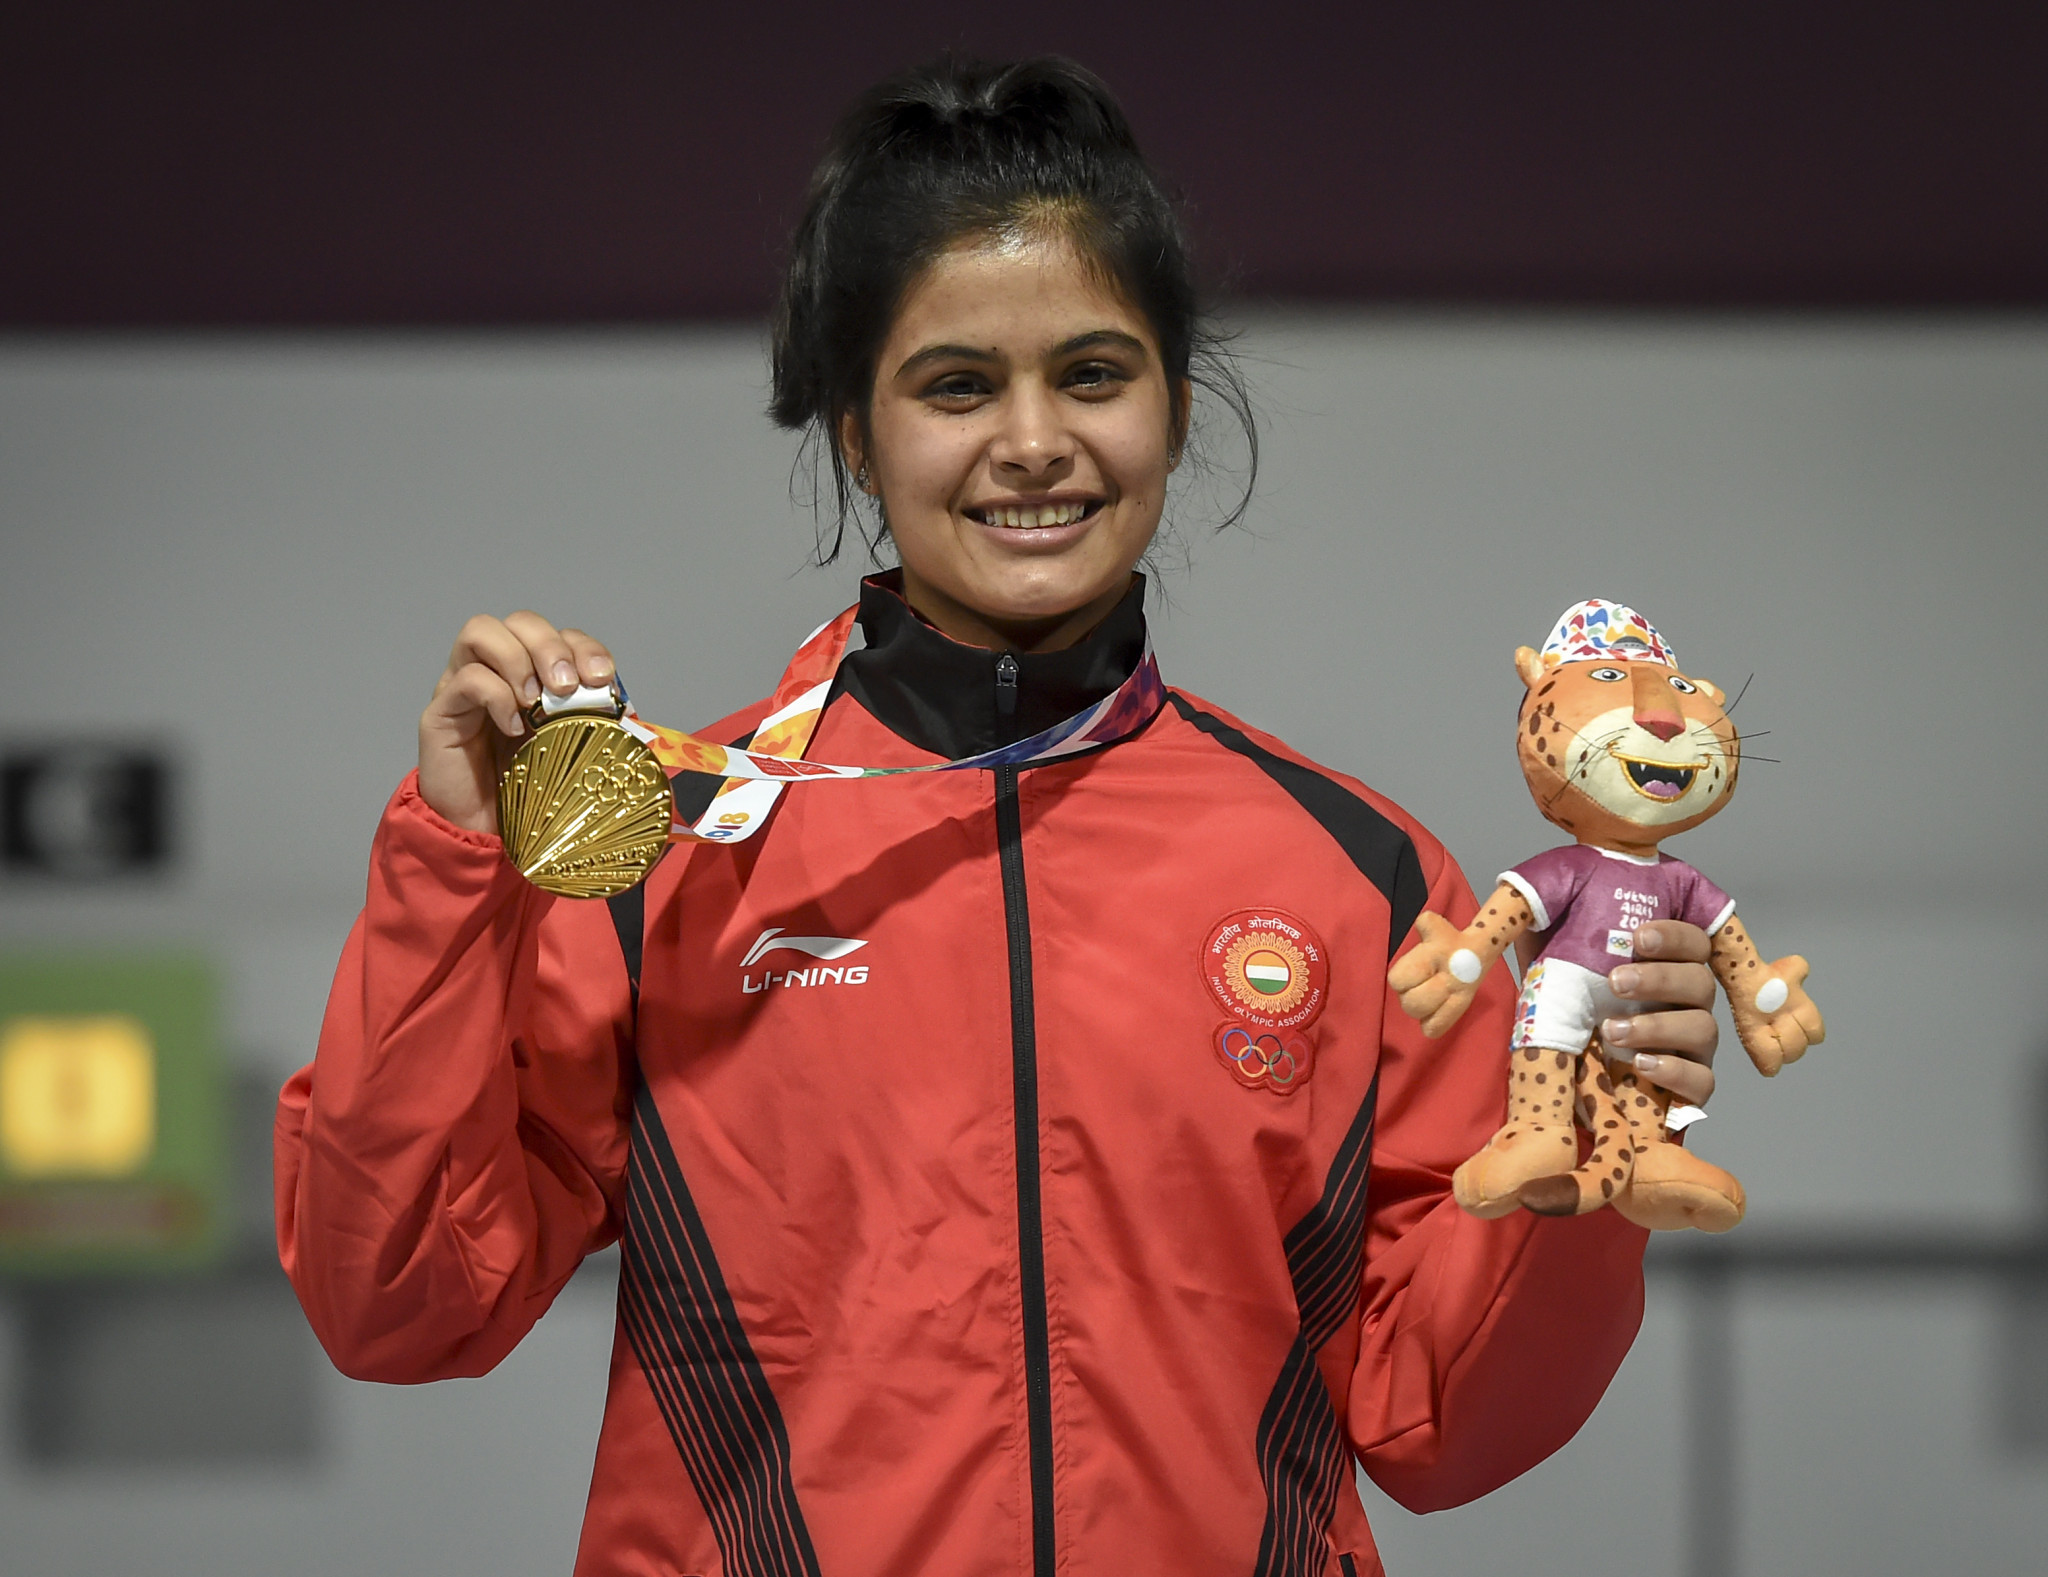 Manu Bhaker is set to receive her gold medal bonus from the Youth Olympics ©Getty Images